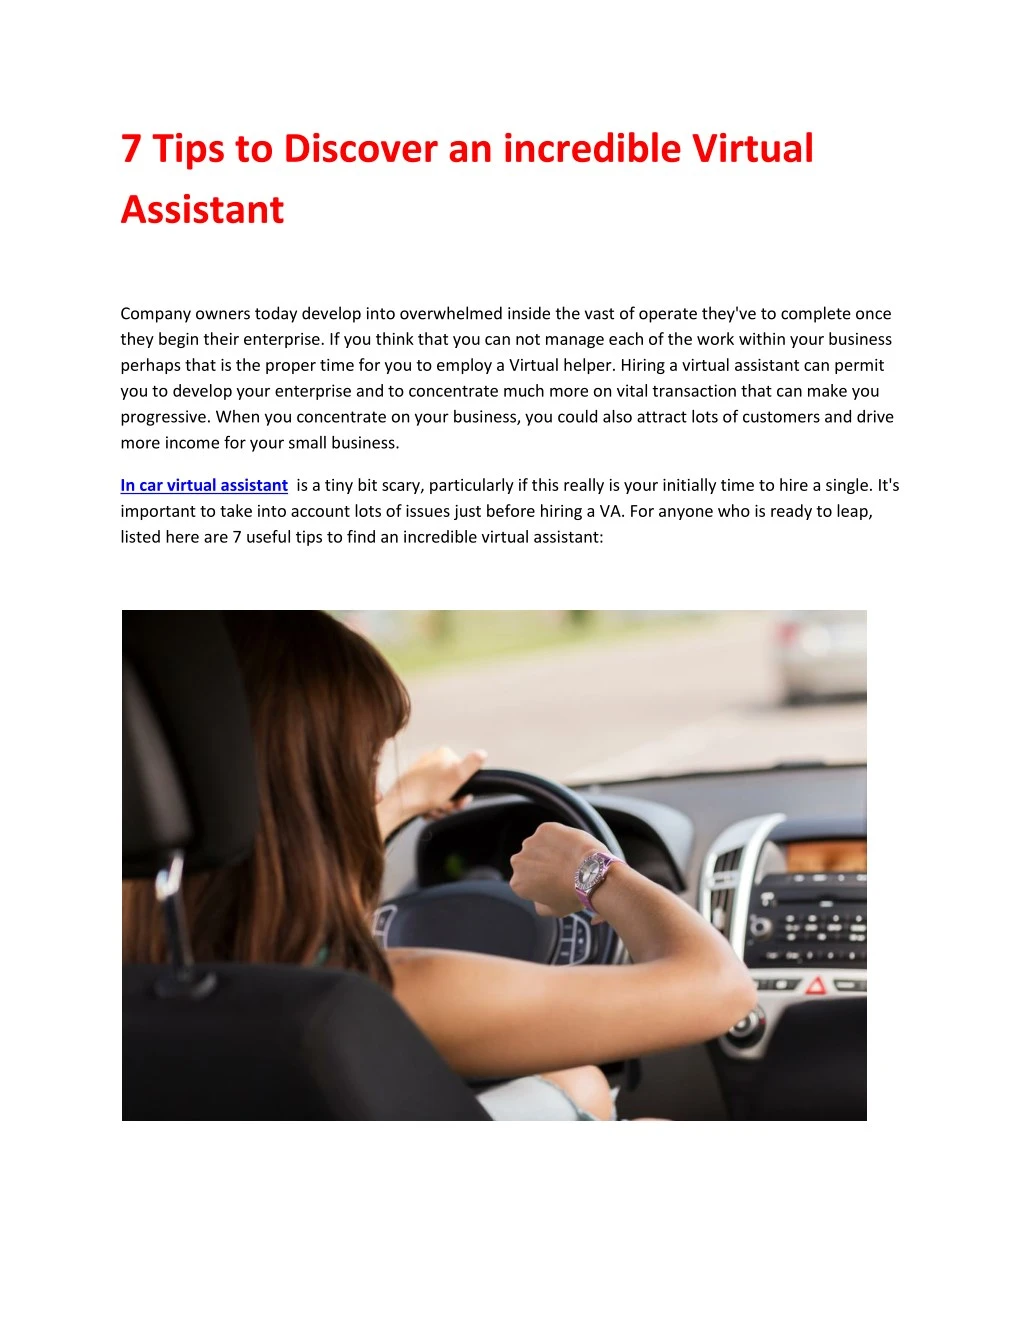 7 tips to discover an incredible virtual assistant